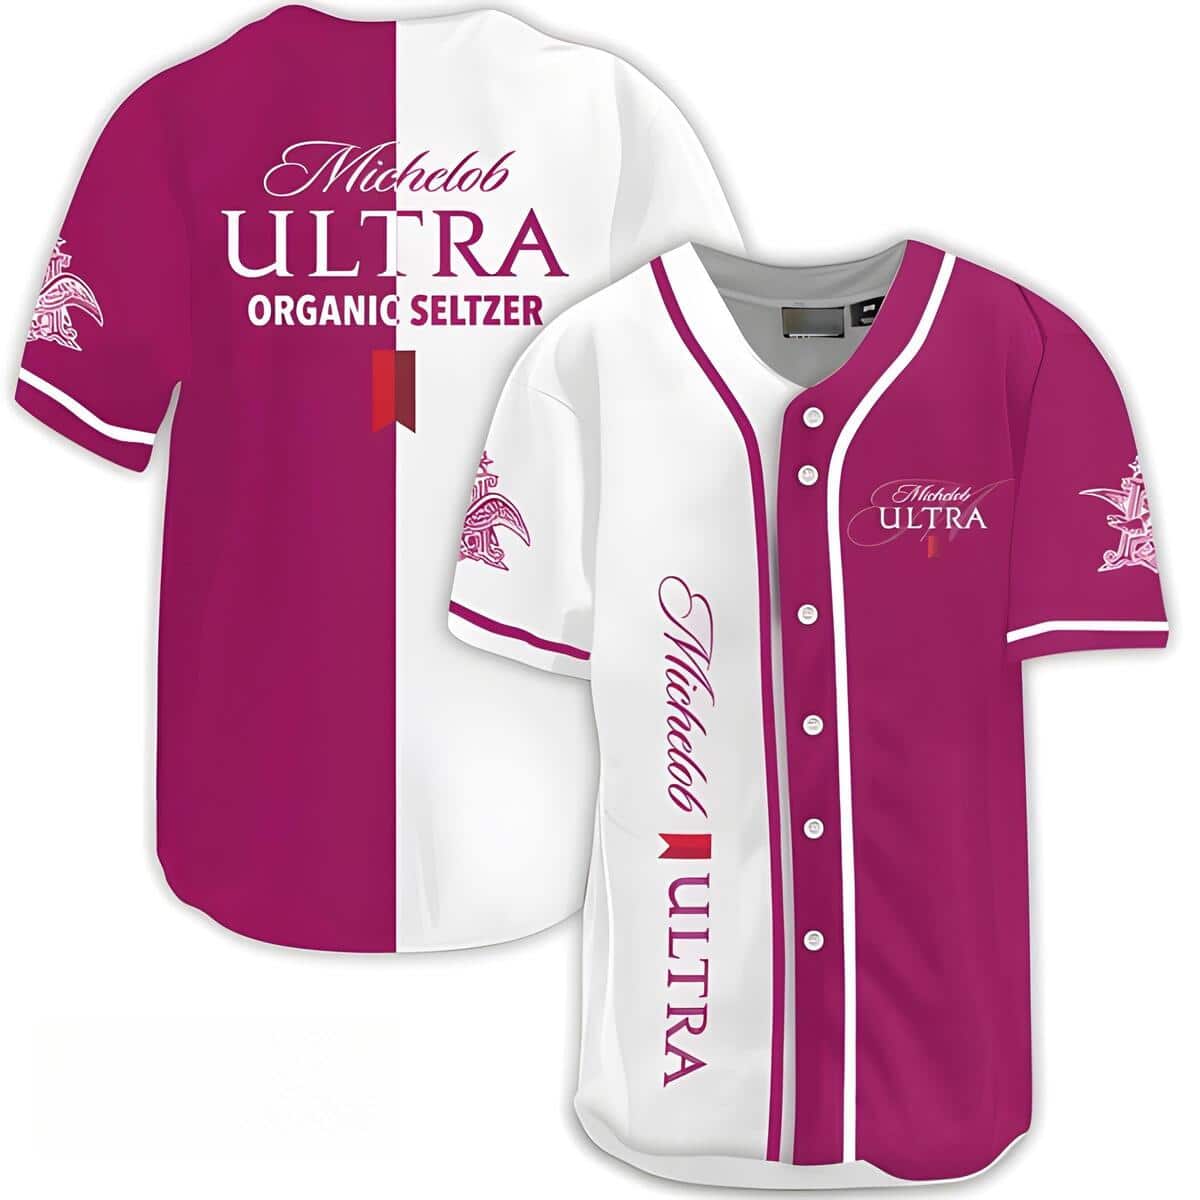 Michelob ULTRA Baseball Jersey Purple White Dual Colors Gift For Dad